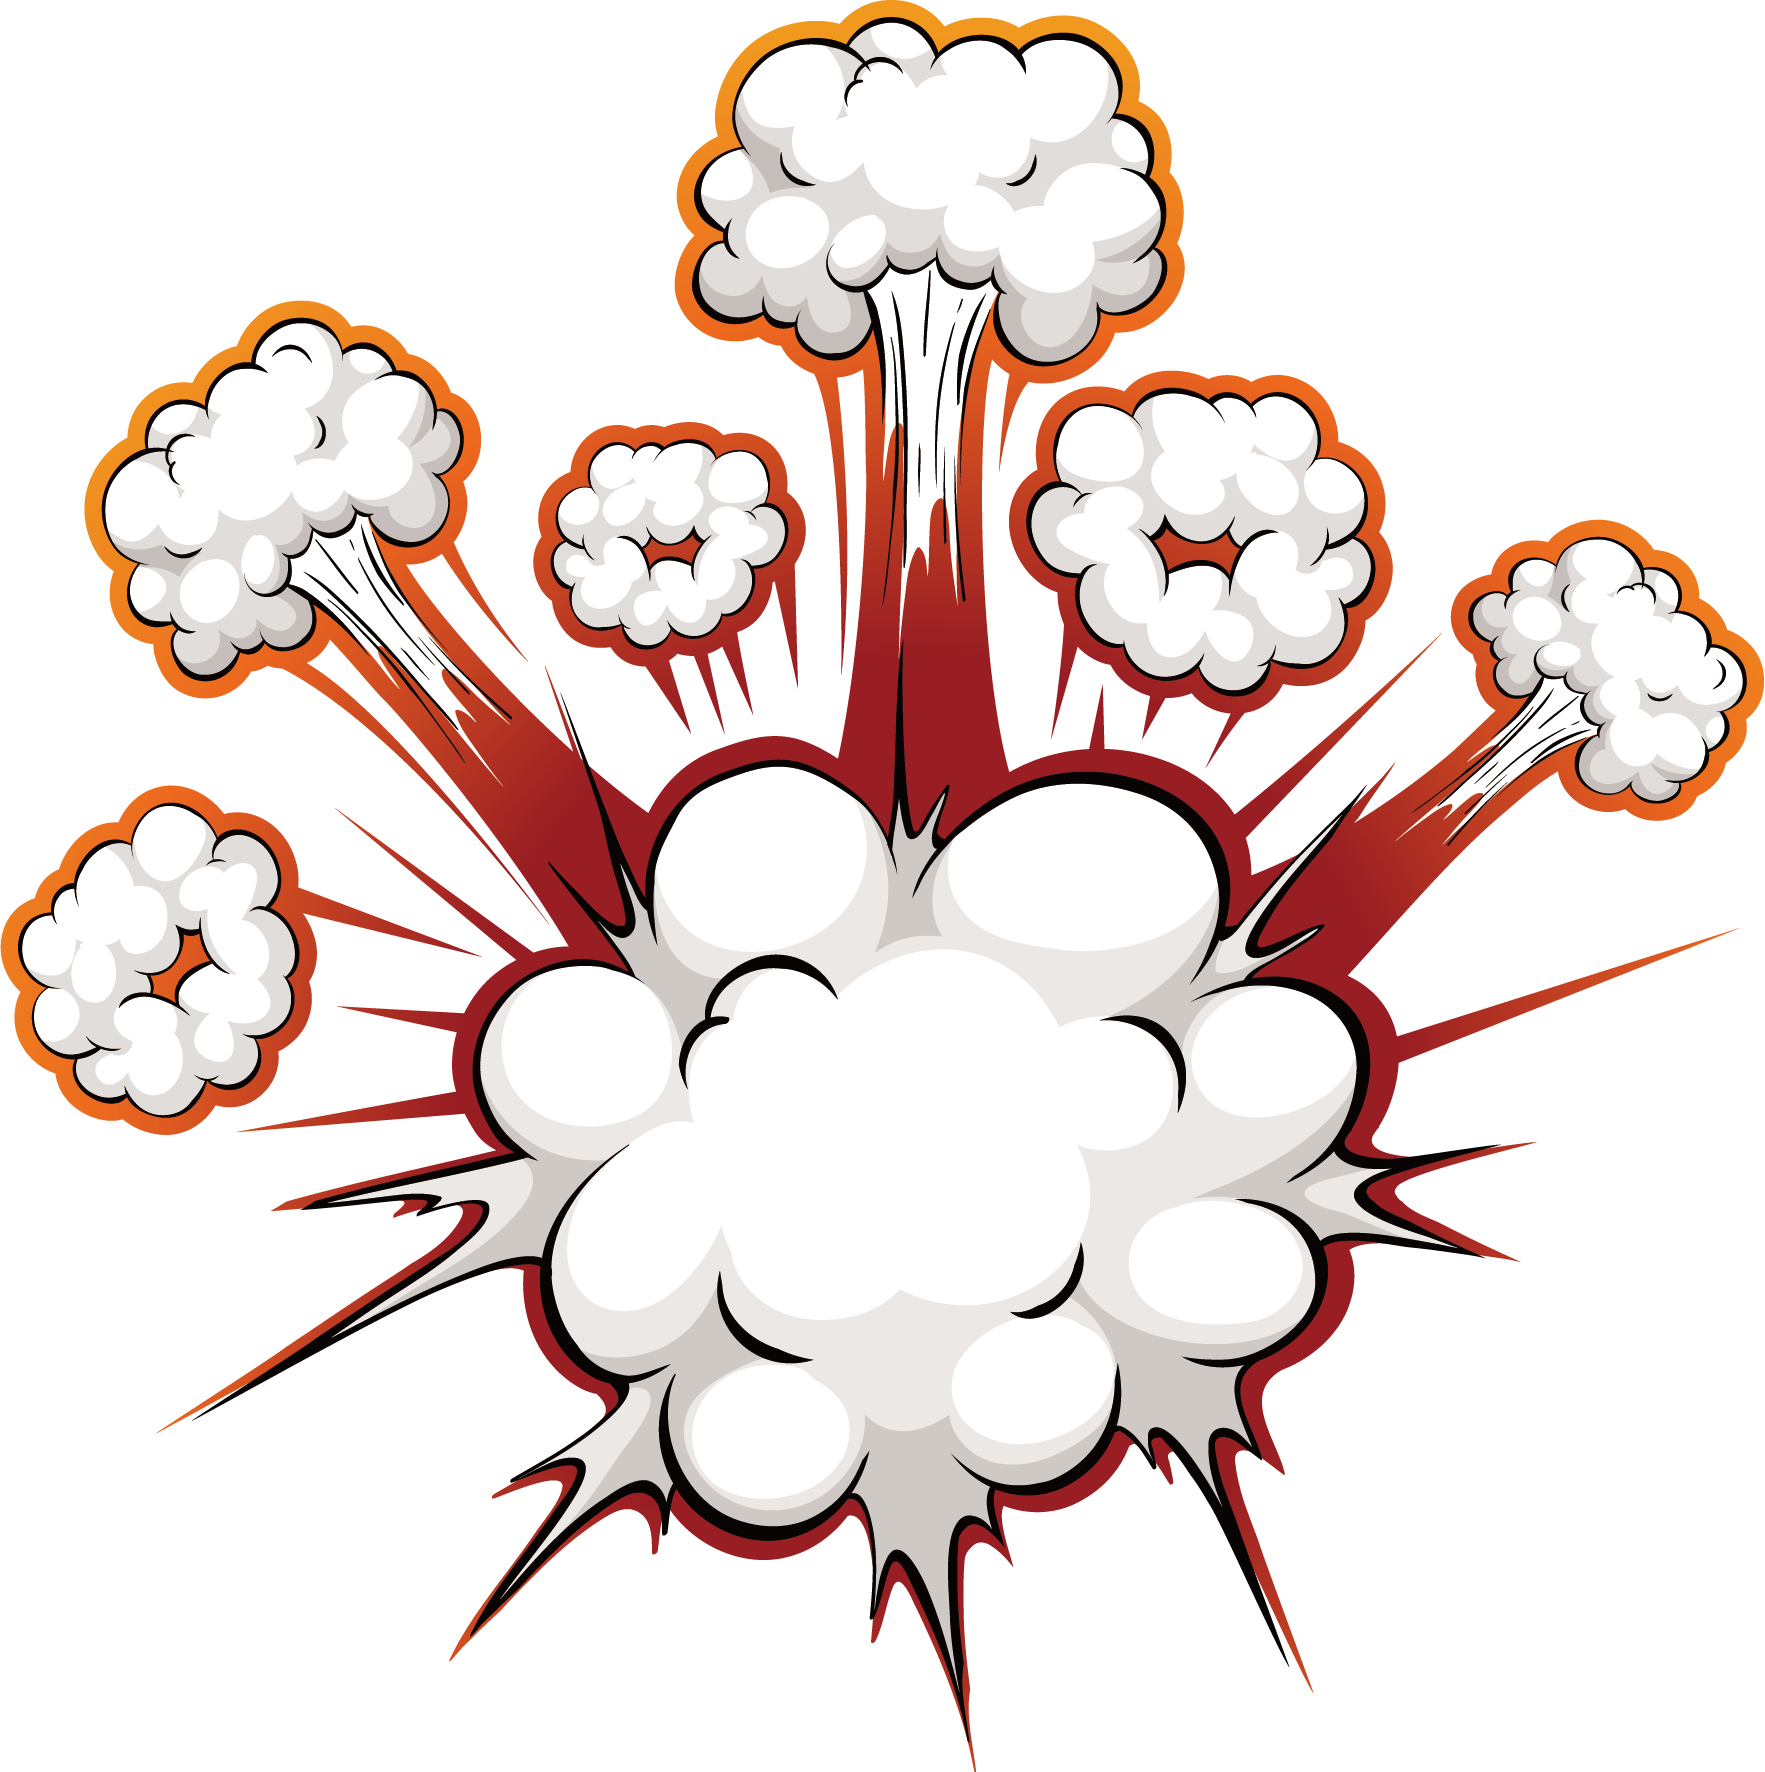 How To Draw A Cartoon Explosion : Explosion Mycrafts | Bodhoswasust